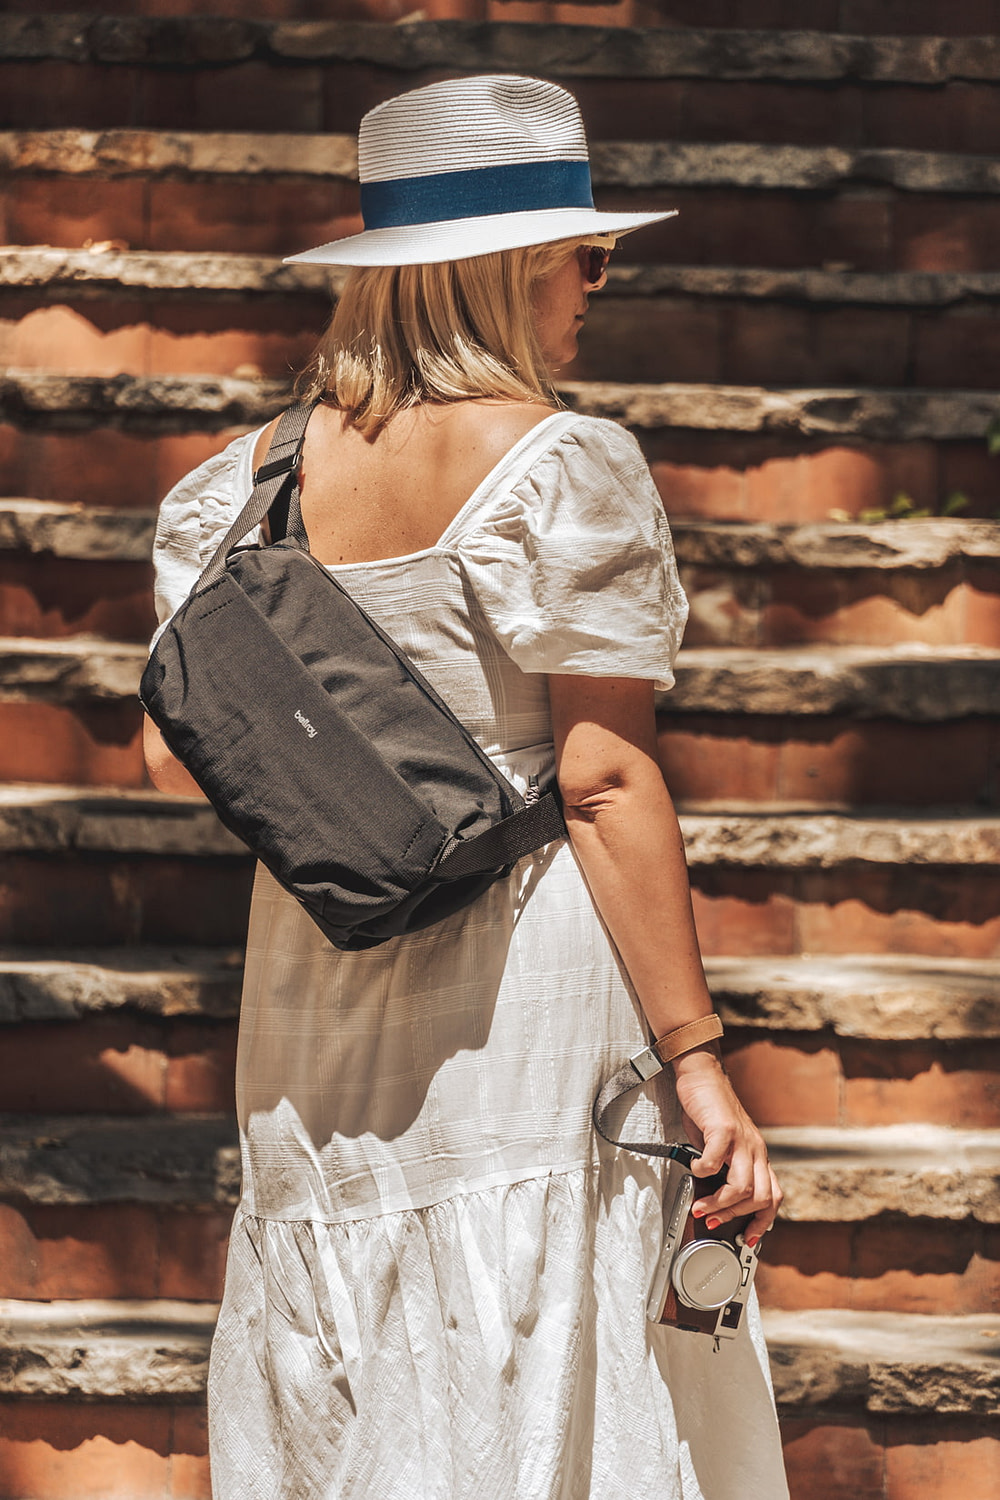 The 11 best sling bags for women in 2023